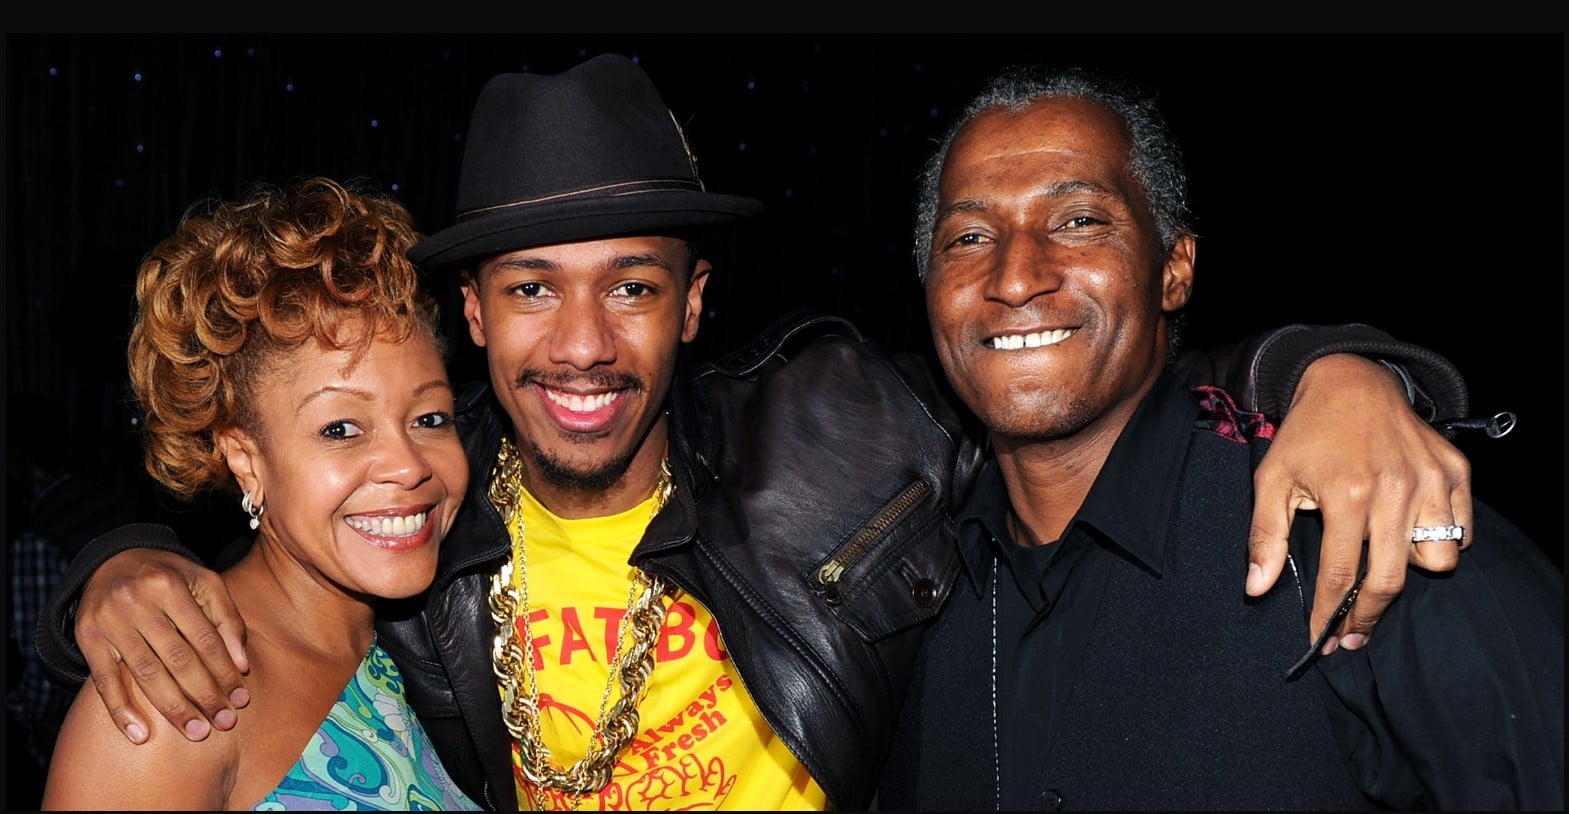 An image of Nick Cannon together with parents